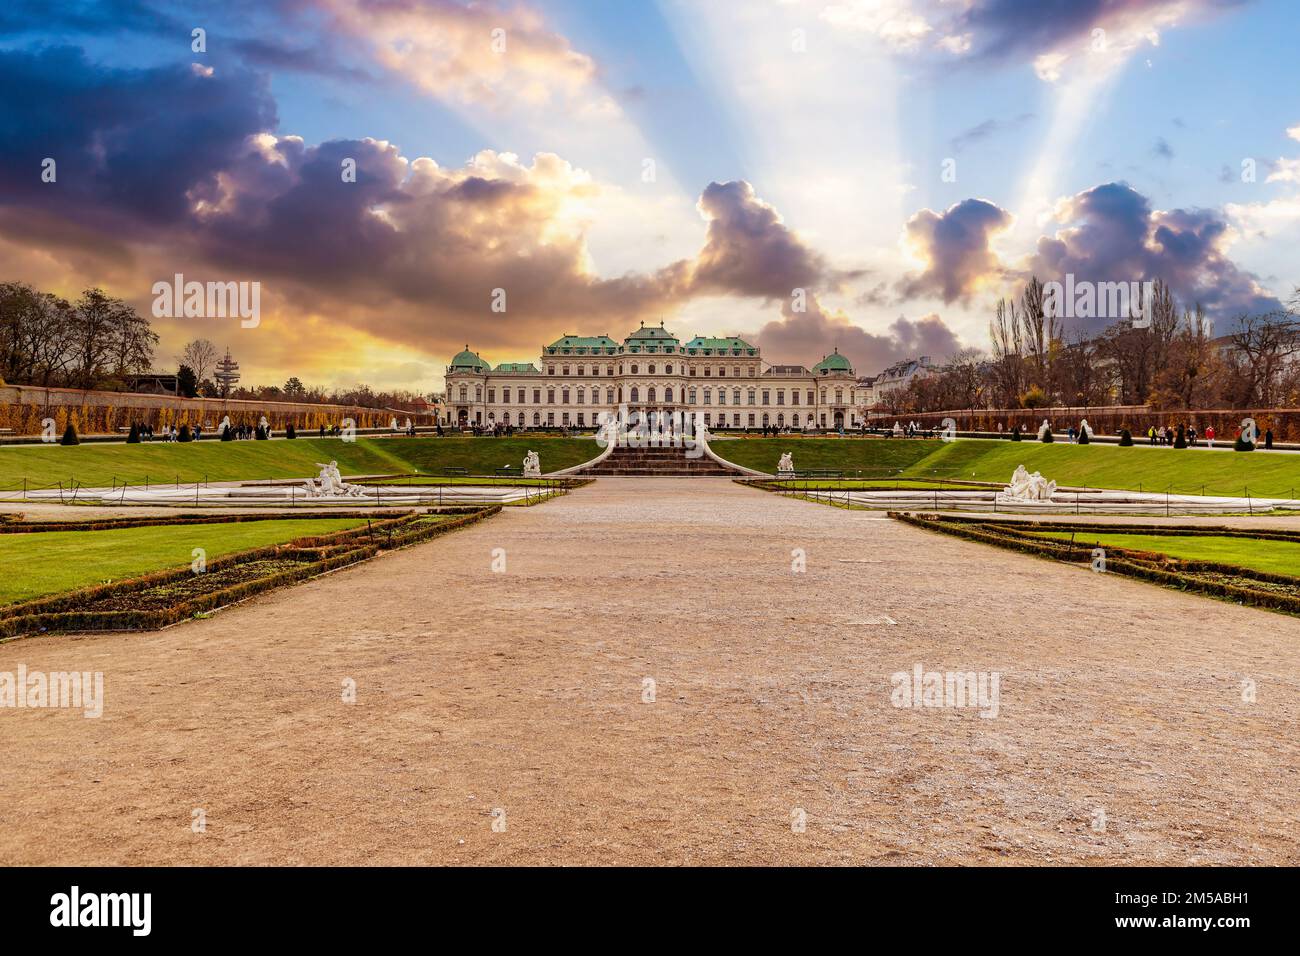 Cityscape with Schloss Belvedere in Vienna. Belvedere Castle at sunset. Stock Photo